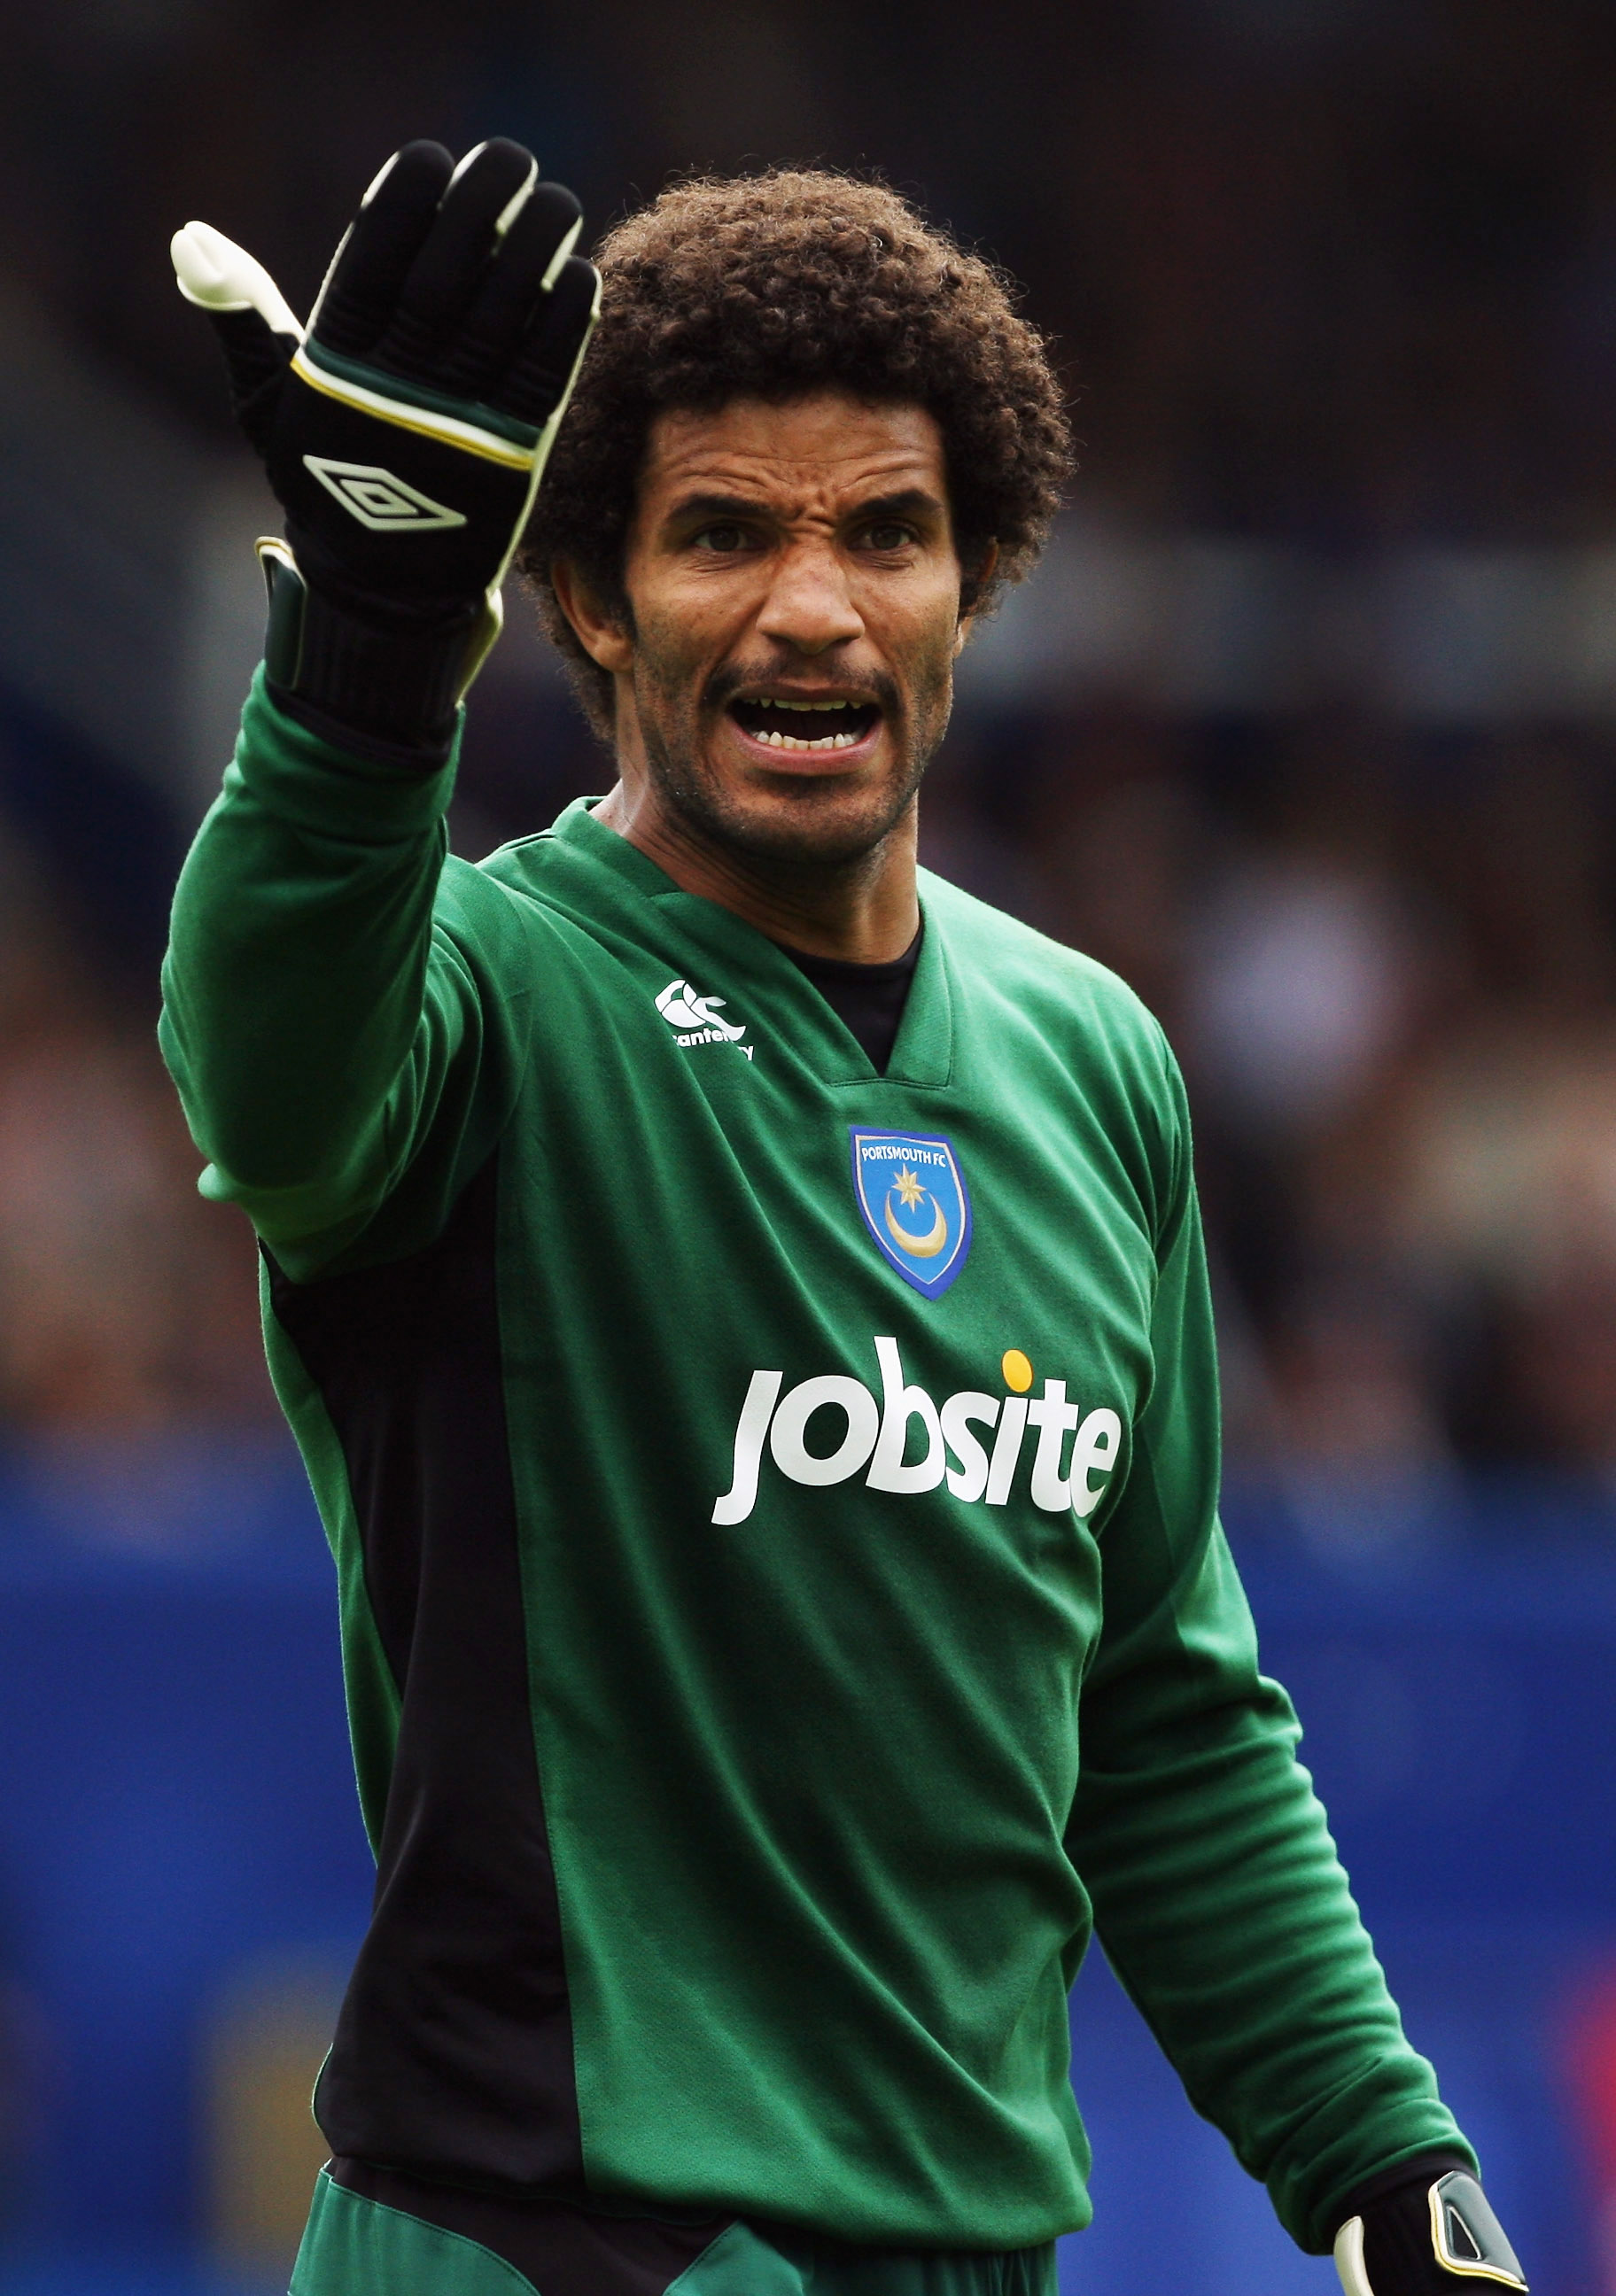 PORTSMOUTH, ENGLAND - AUGUST 15:  David James of Portsmouth instructs his team during the Barclays Premier League match between Portsmouth and Fulham at Fratton Park on August 15, 2009 in Portsmouth, England.  (Photo by Bryn Lennon/Getty Images)